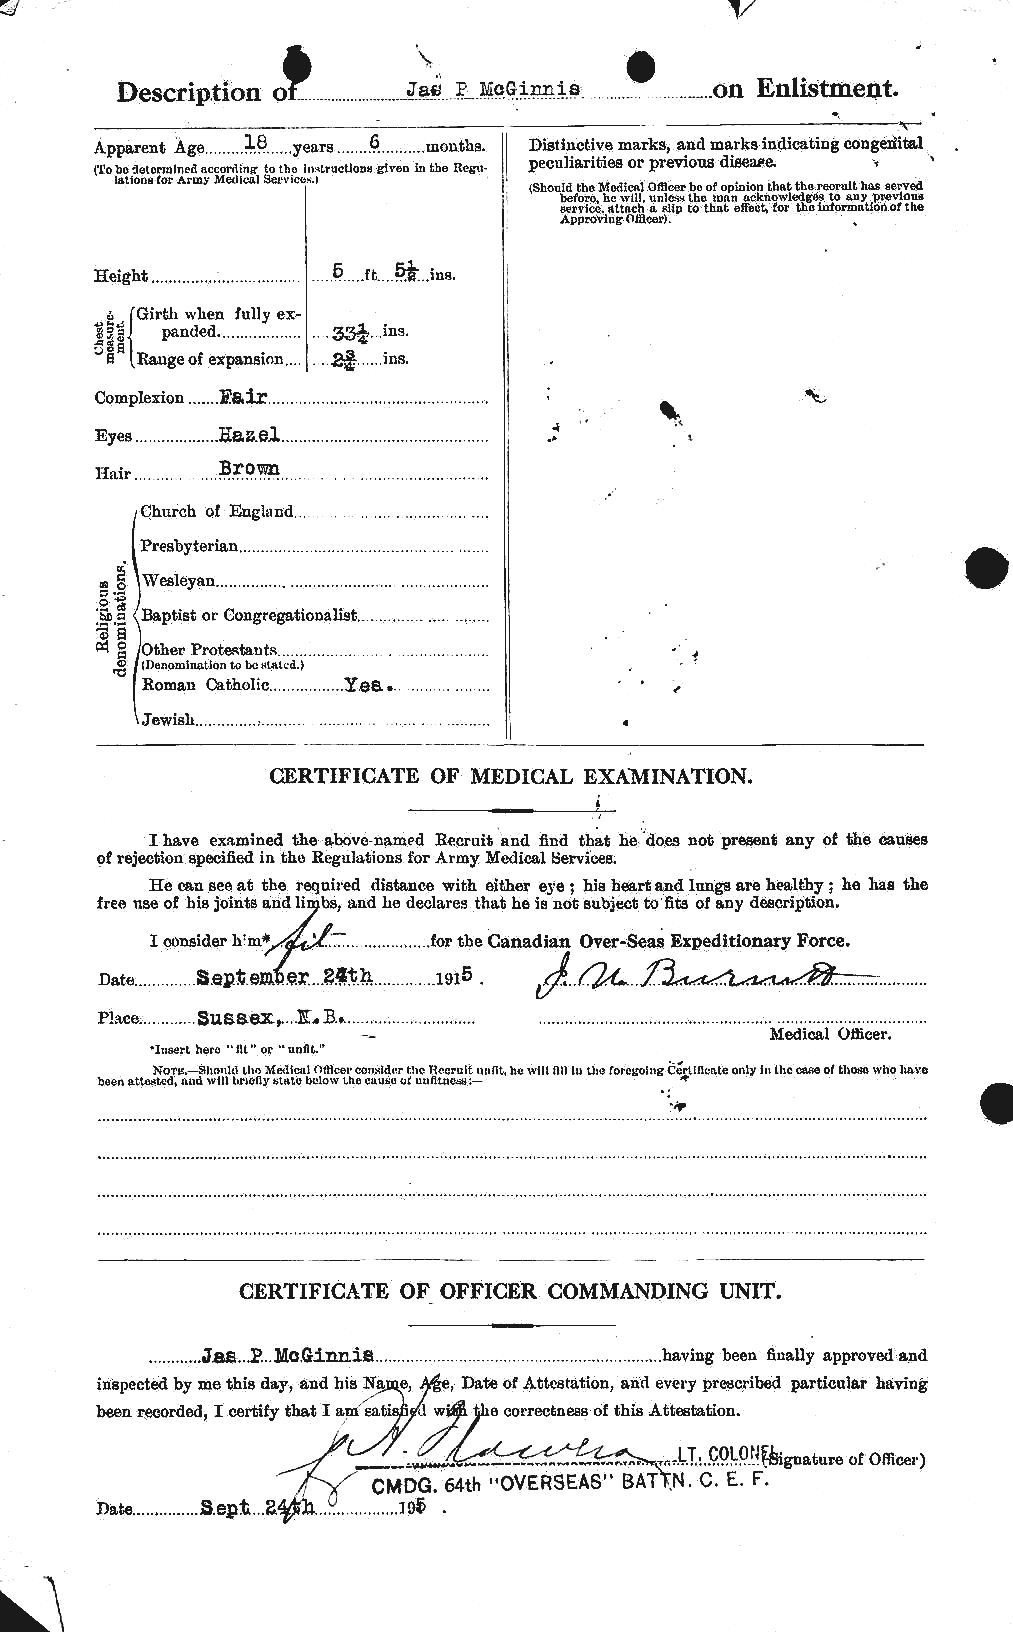 Personnel Records of the First World War - CEF 526411b